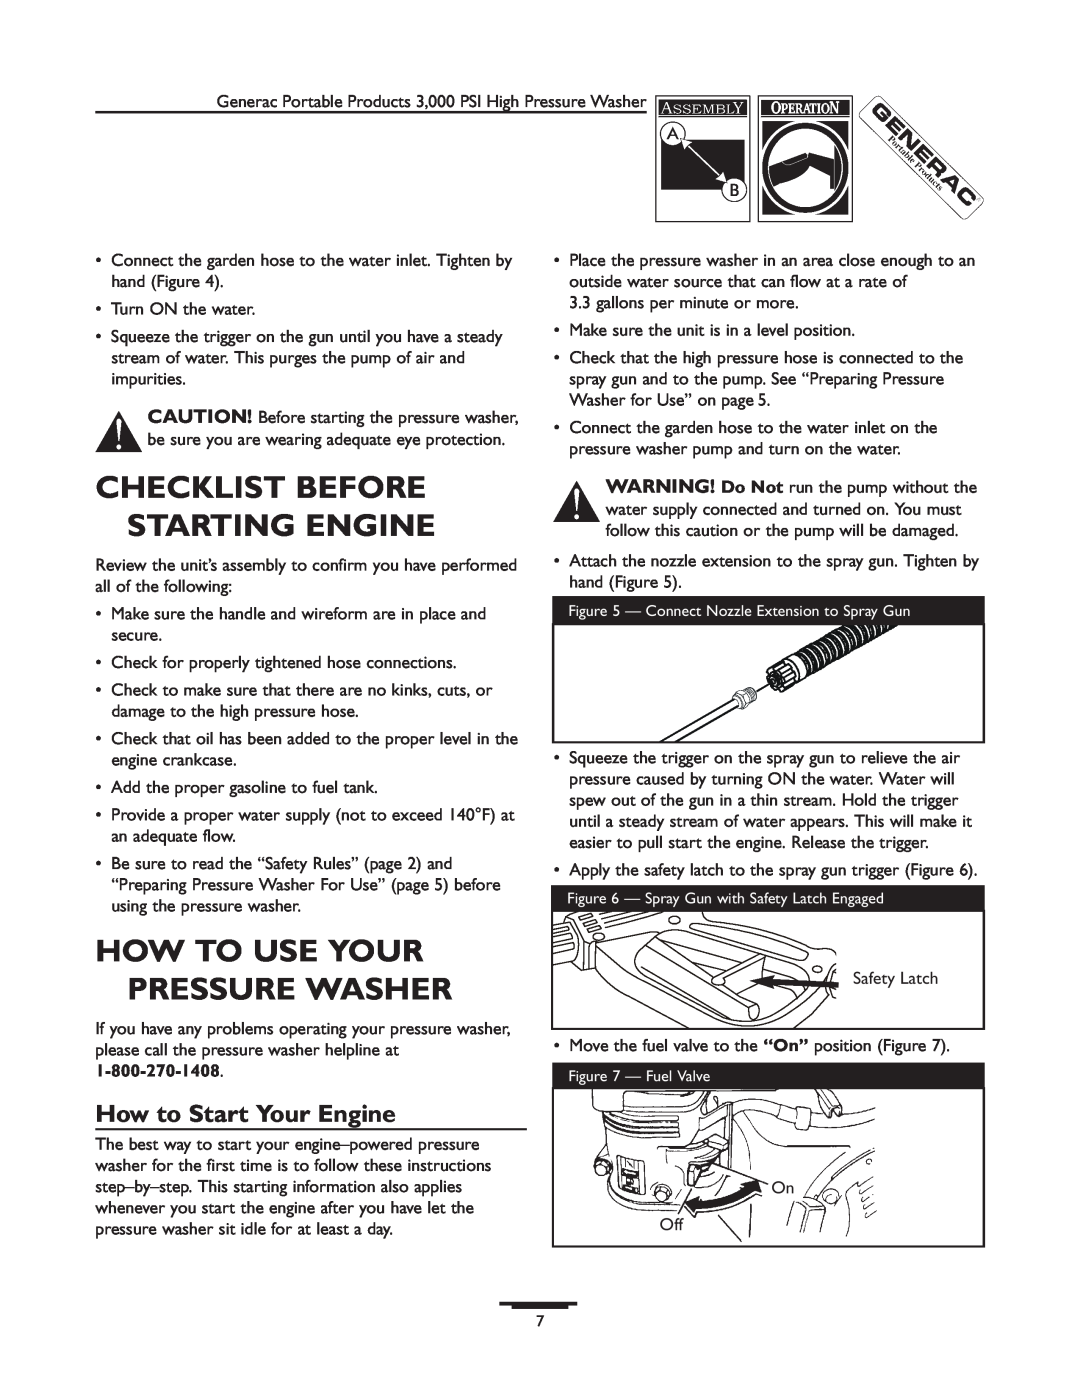 Generac 1418-0 manual Checklist Before Starting Engine, How To Use Your Pressure Washer, How to Start Your Engine 